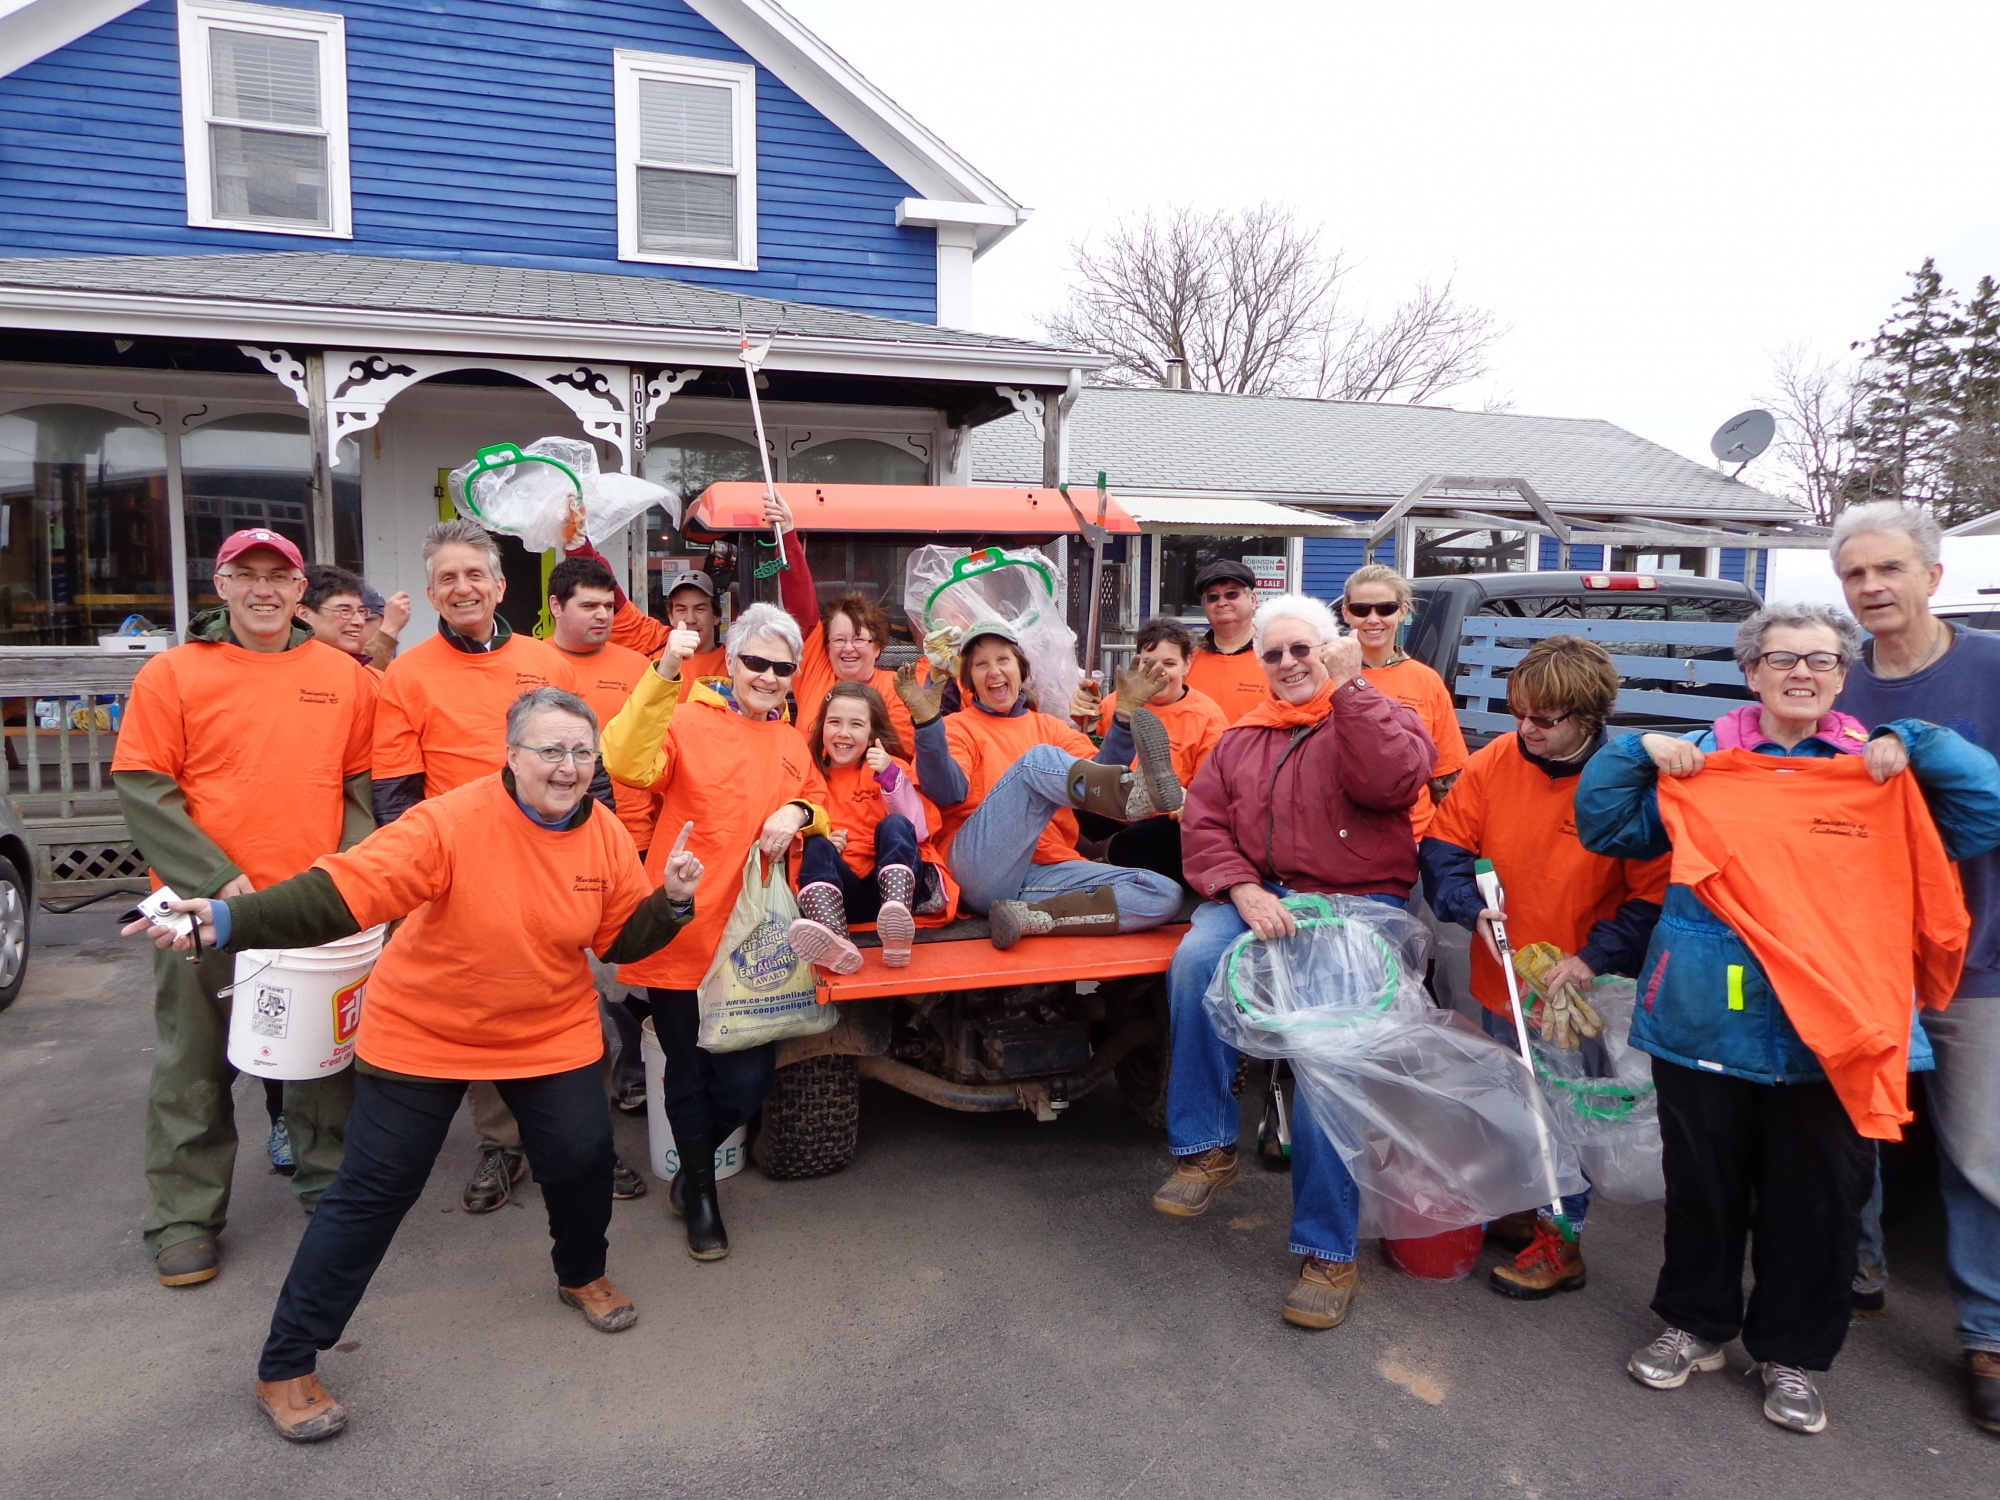 A community cleanup called the Great Garbage Challenge was part of Earth Day activities in Pugwash last April. The community was one of the 2023 recipients of the Lieutenant-Governor's Community Spirit Award. (Contributed)